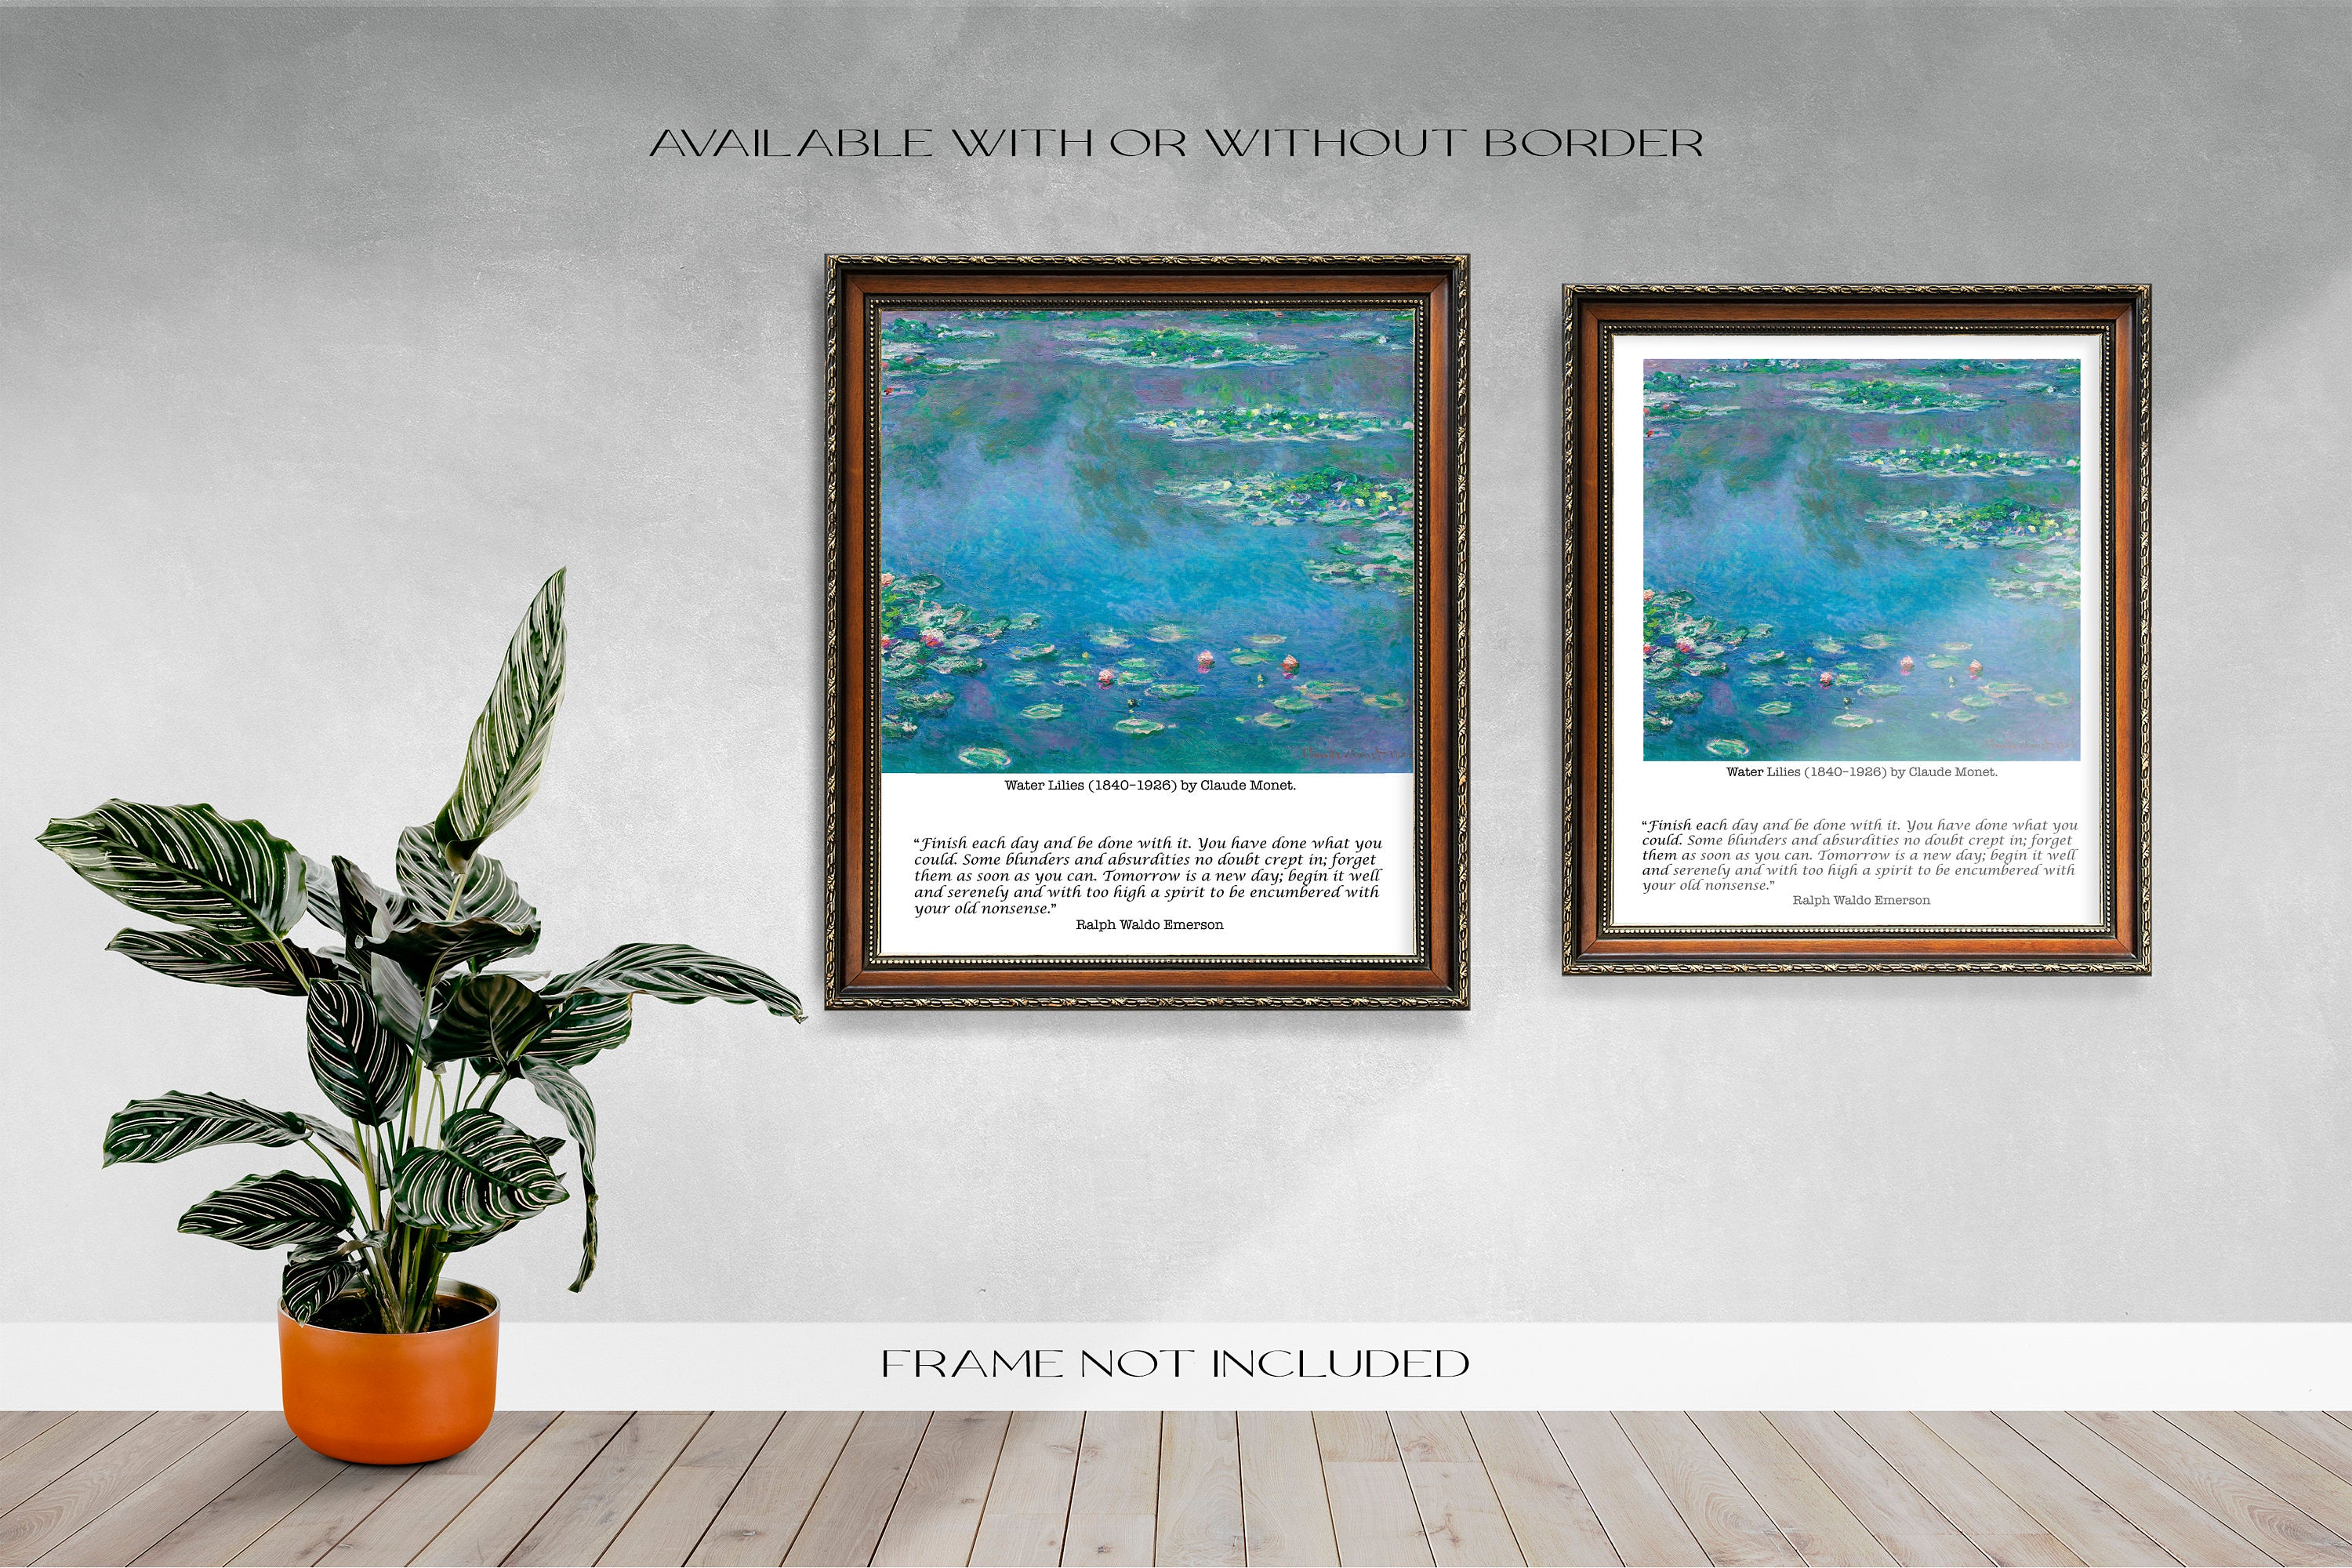 Ralph Waldo Emerson - Claude Monet Fine Art Prints - Waterlilies, Finish each day and be done with it